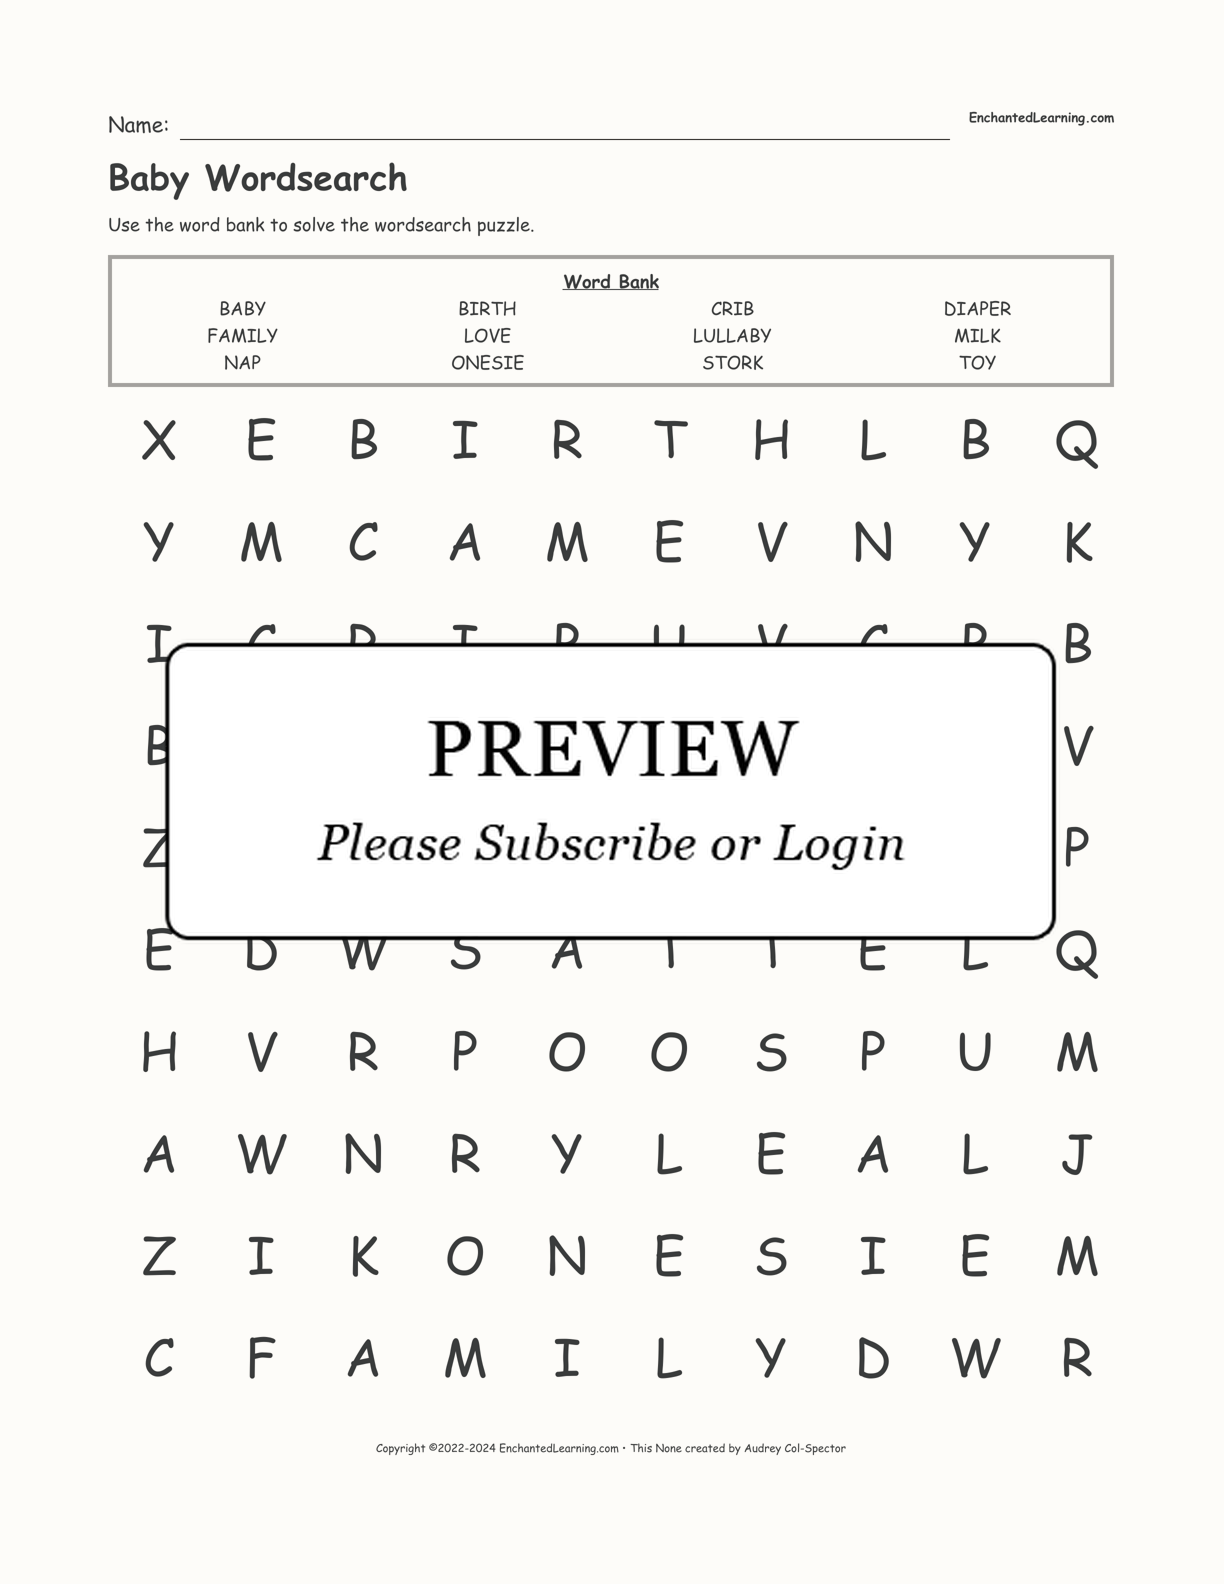 Baby Wordsearch interactive worksheet page 1